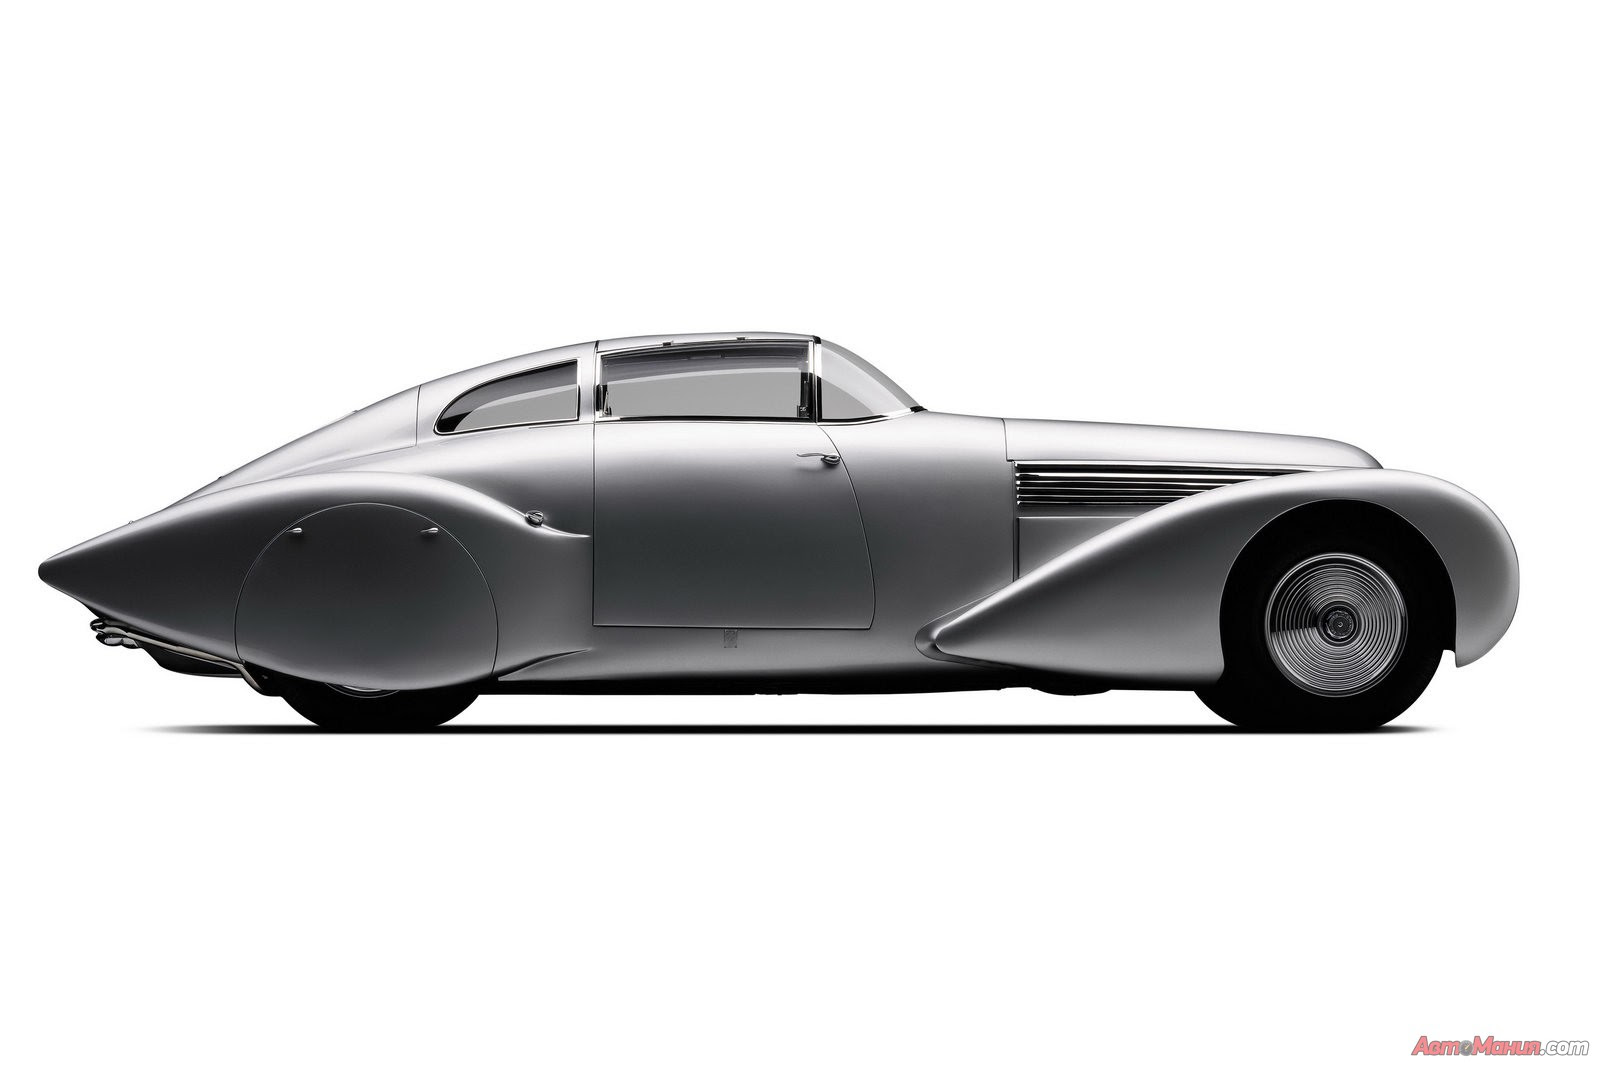 Nikhilism: 12 Cars that our grandpas would have lusted 